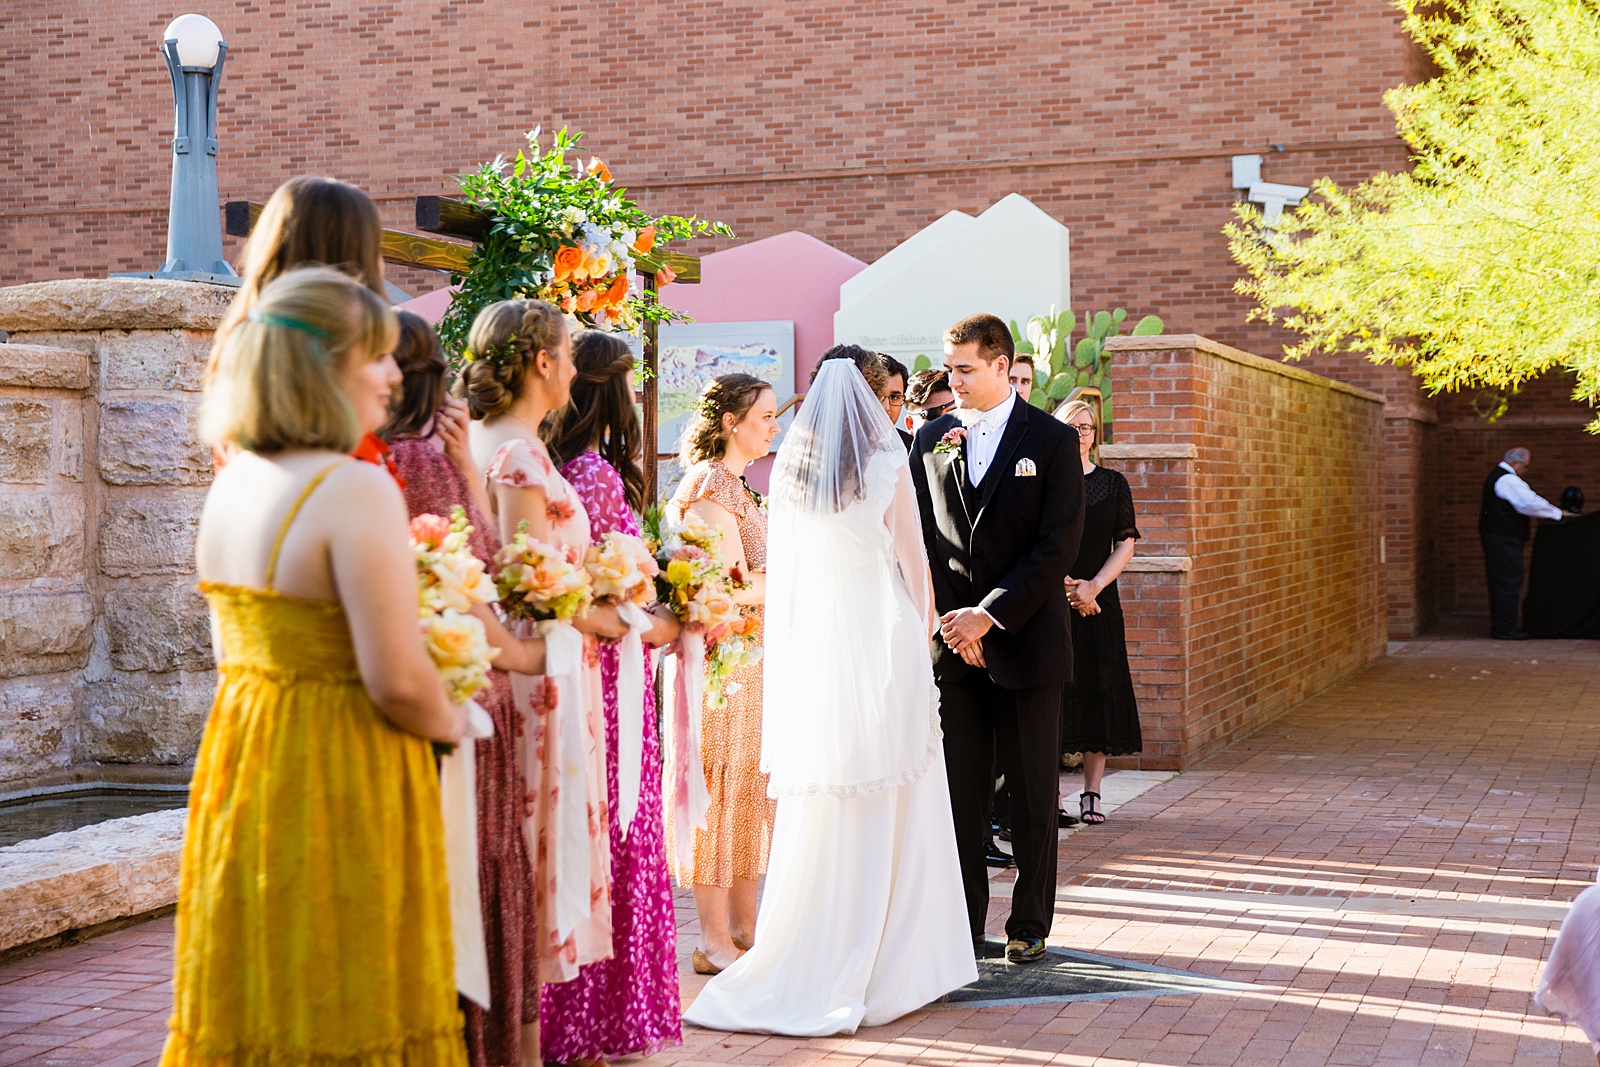 Groom looking at his bride during their wedding ceremony at Arizona Historical Society by Tempe wedding photographer PMA Photography.